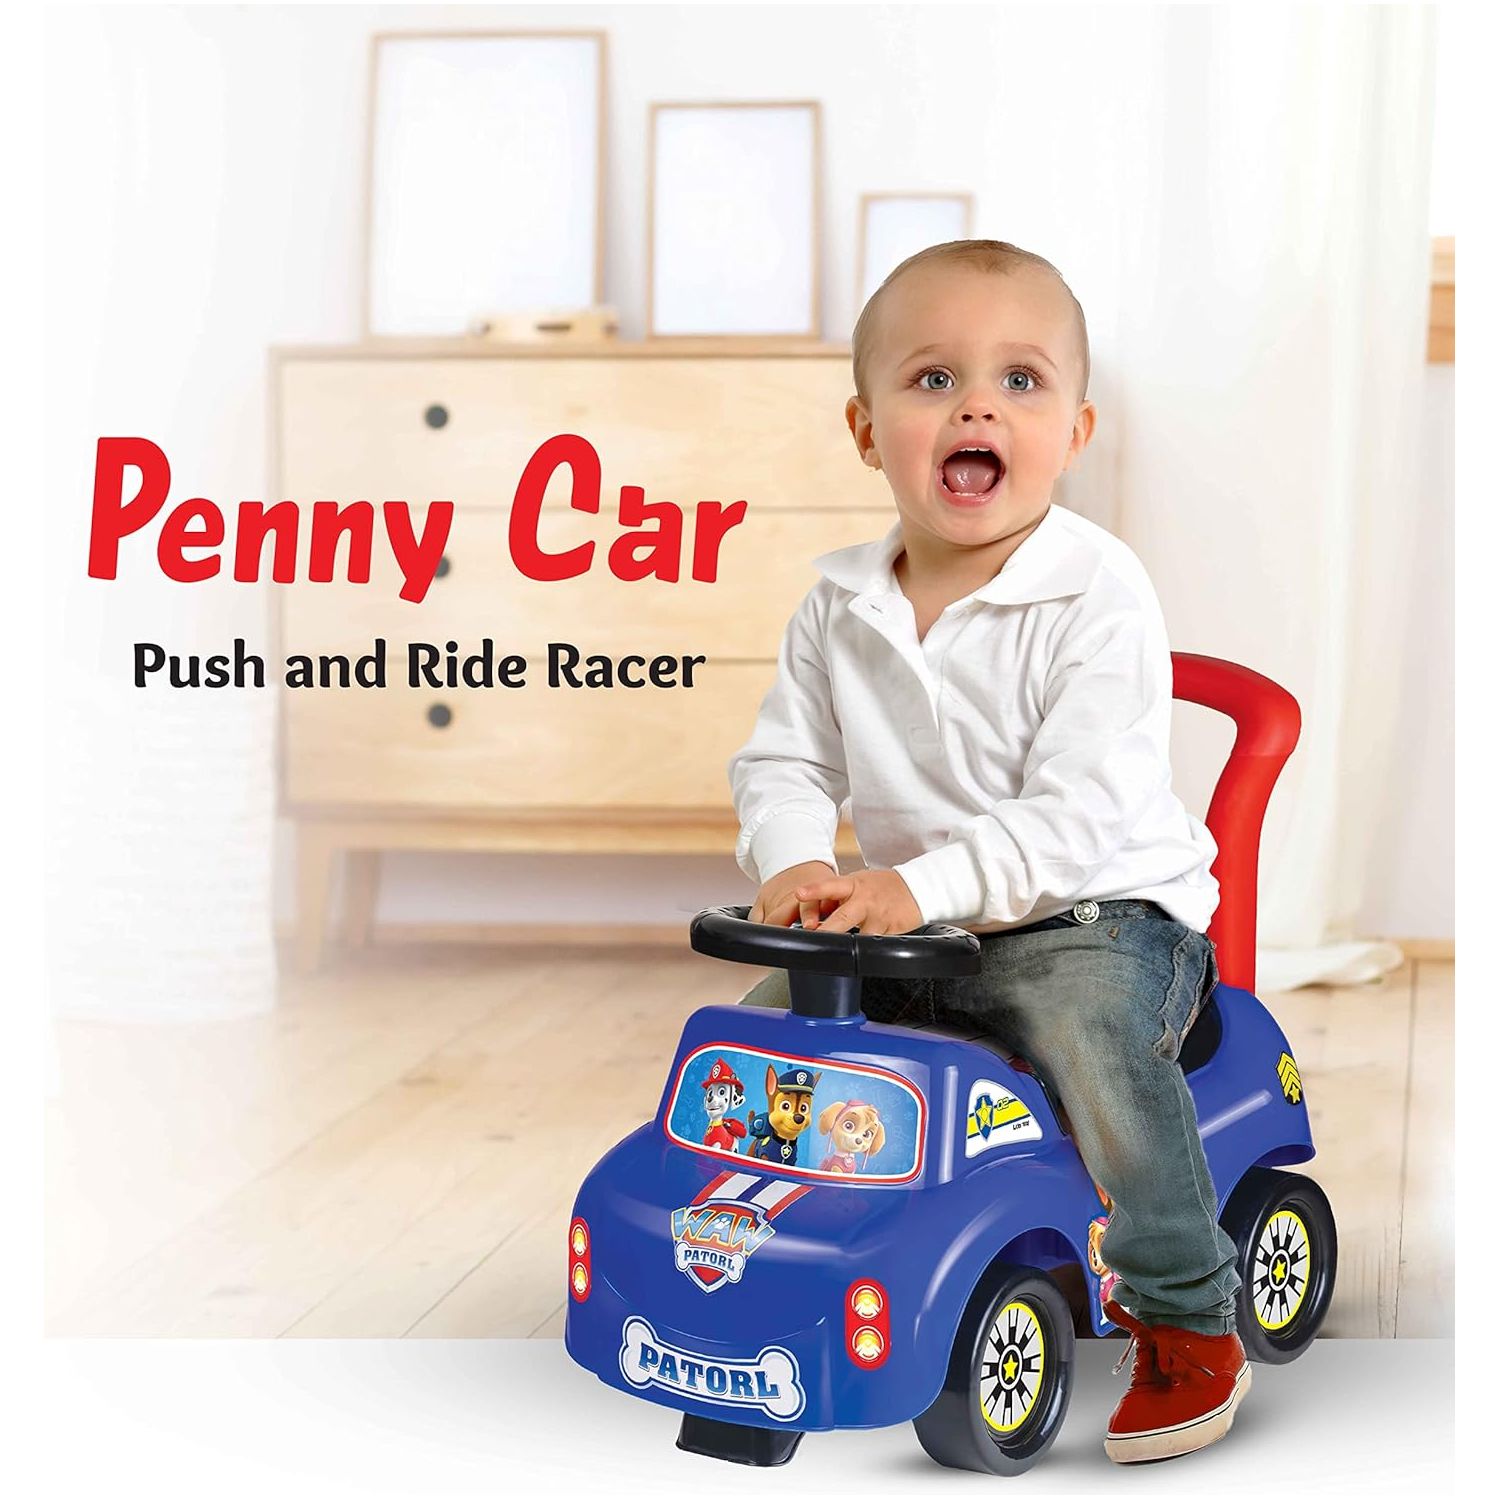 Tic Toys Plastic Push Car Game With Storage Box And Button For Kids - Multi Color